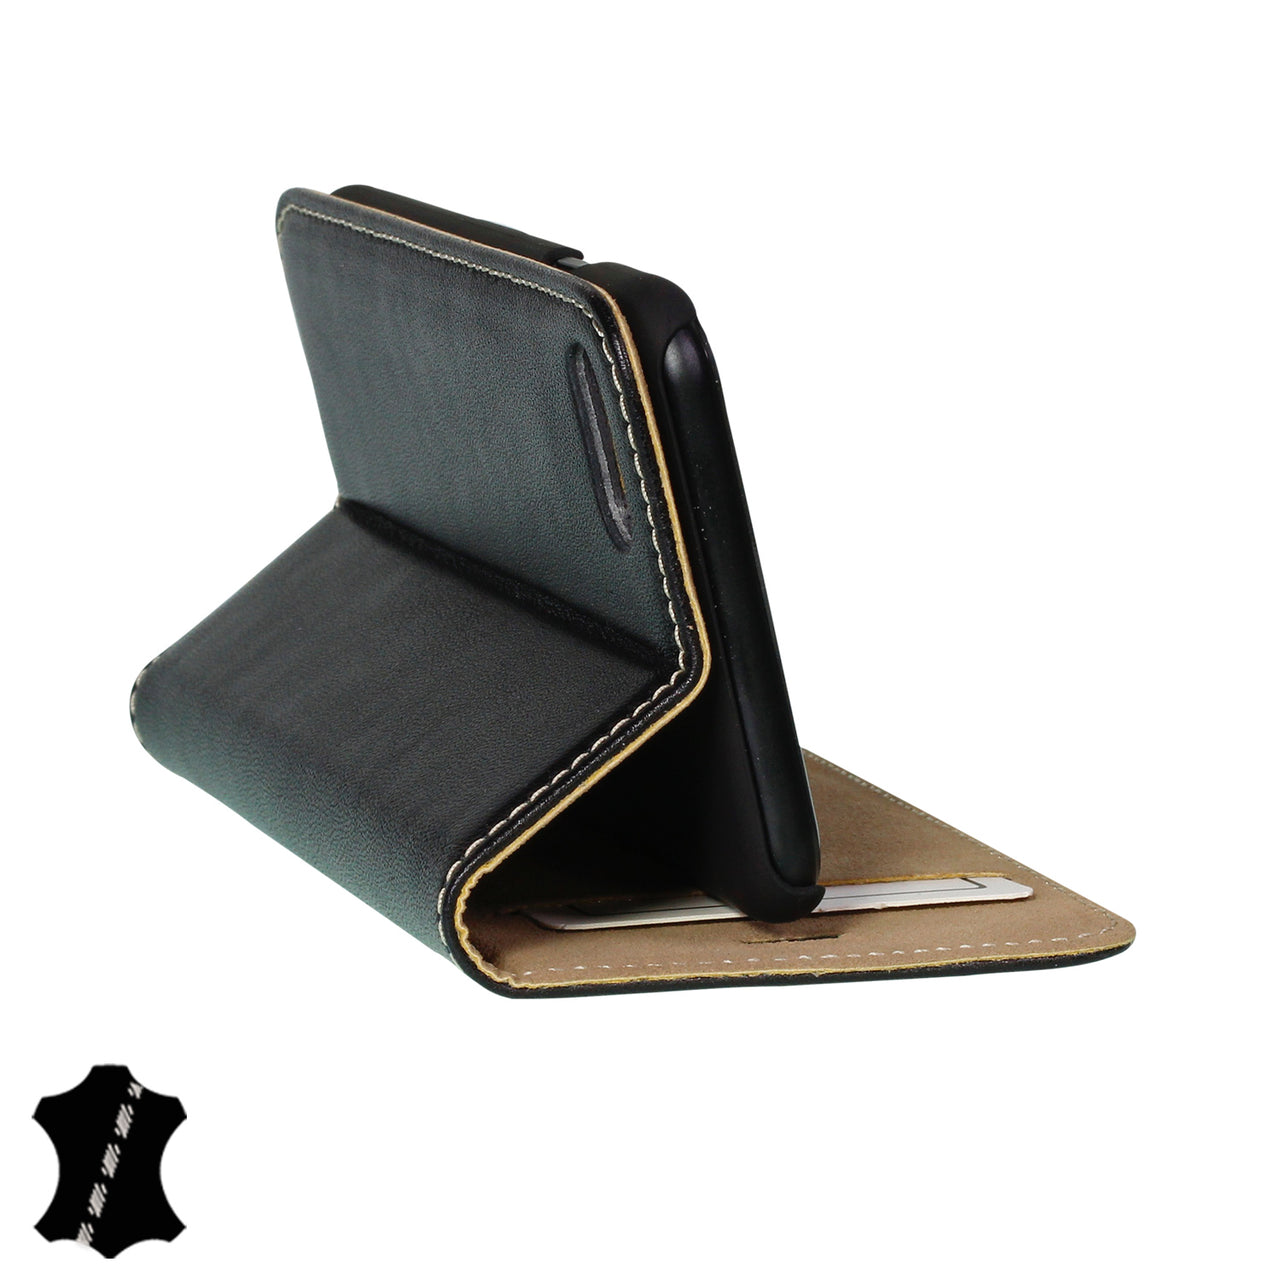 iPhone 6 / 6s Genuine Leather Case with Stand | Artisancover